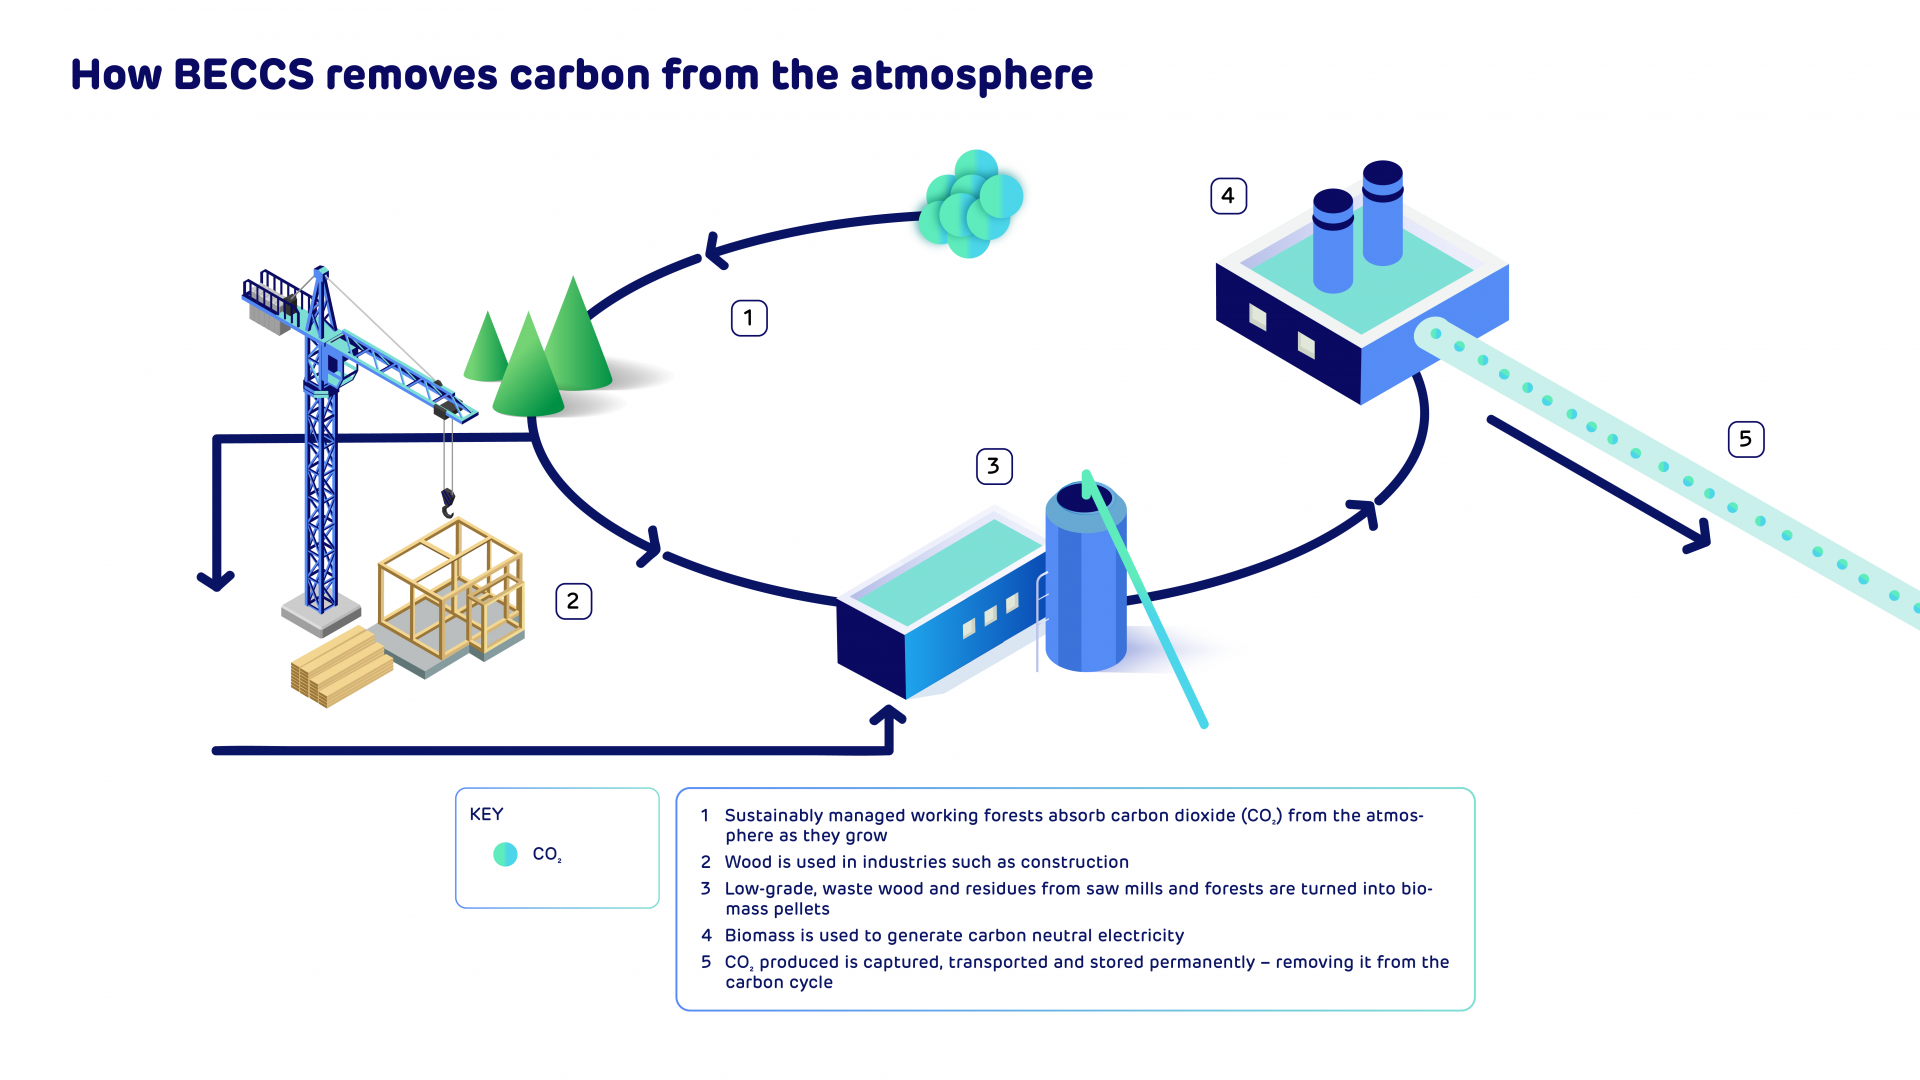 How BECCS removes carbon from the atmosphere